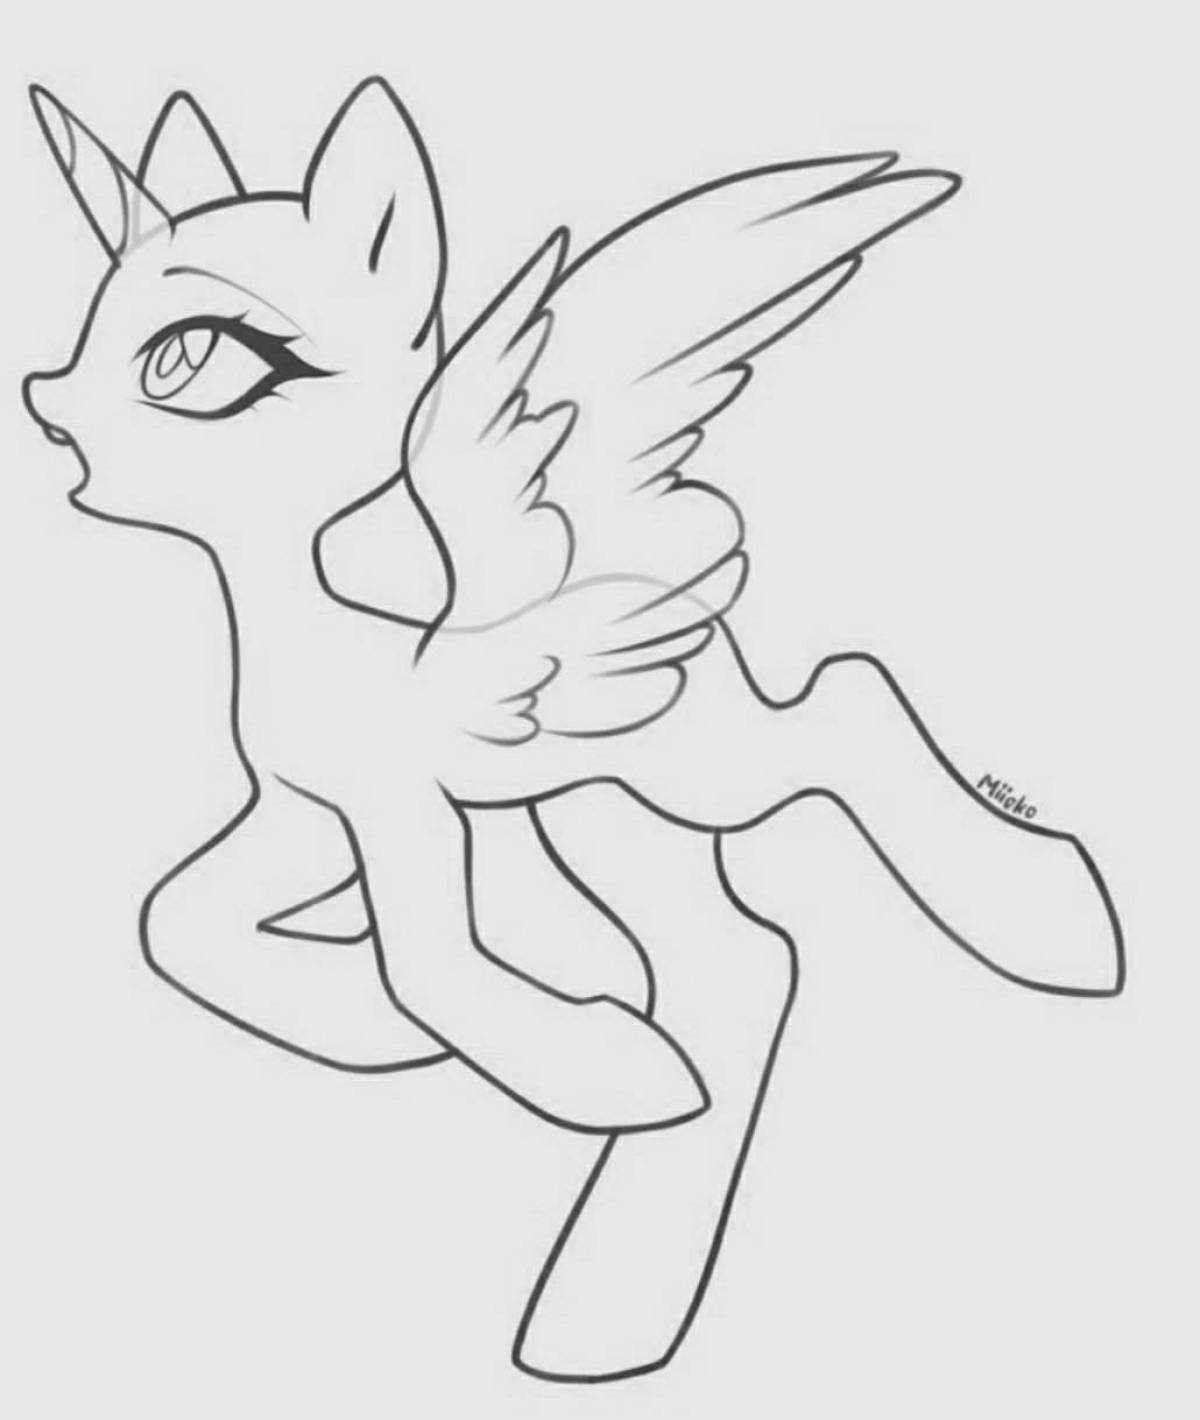 Coloring book shining pony mannequin